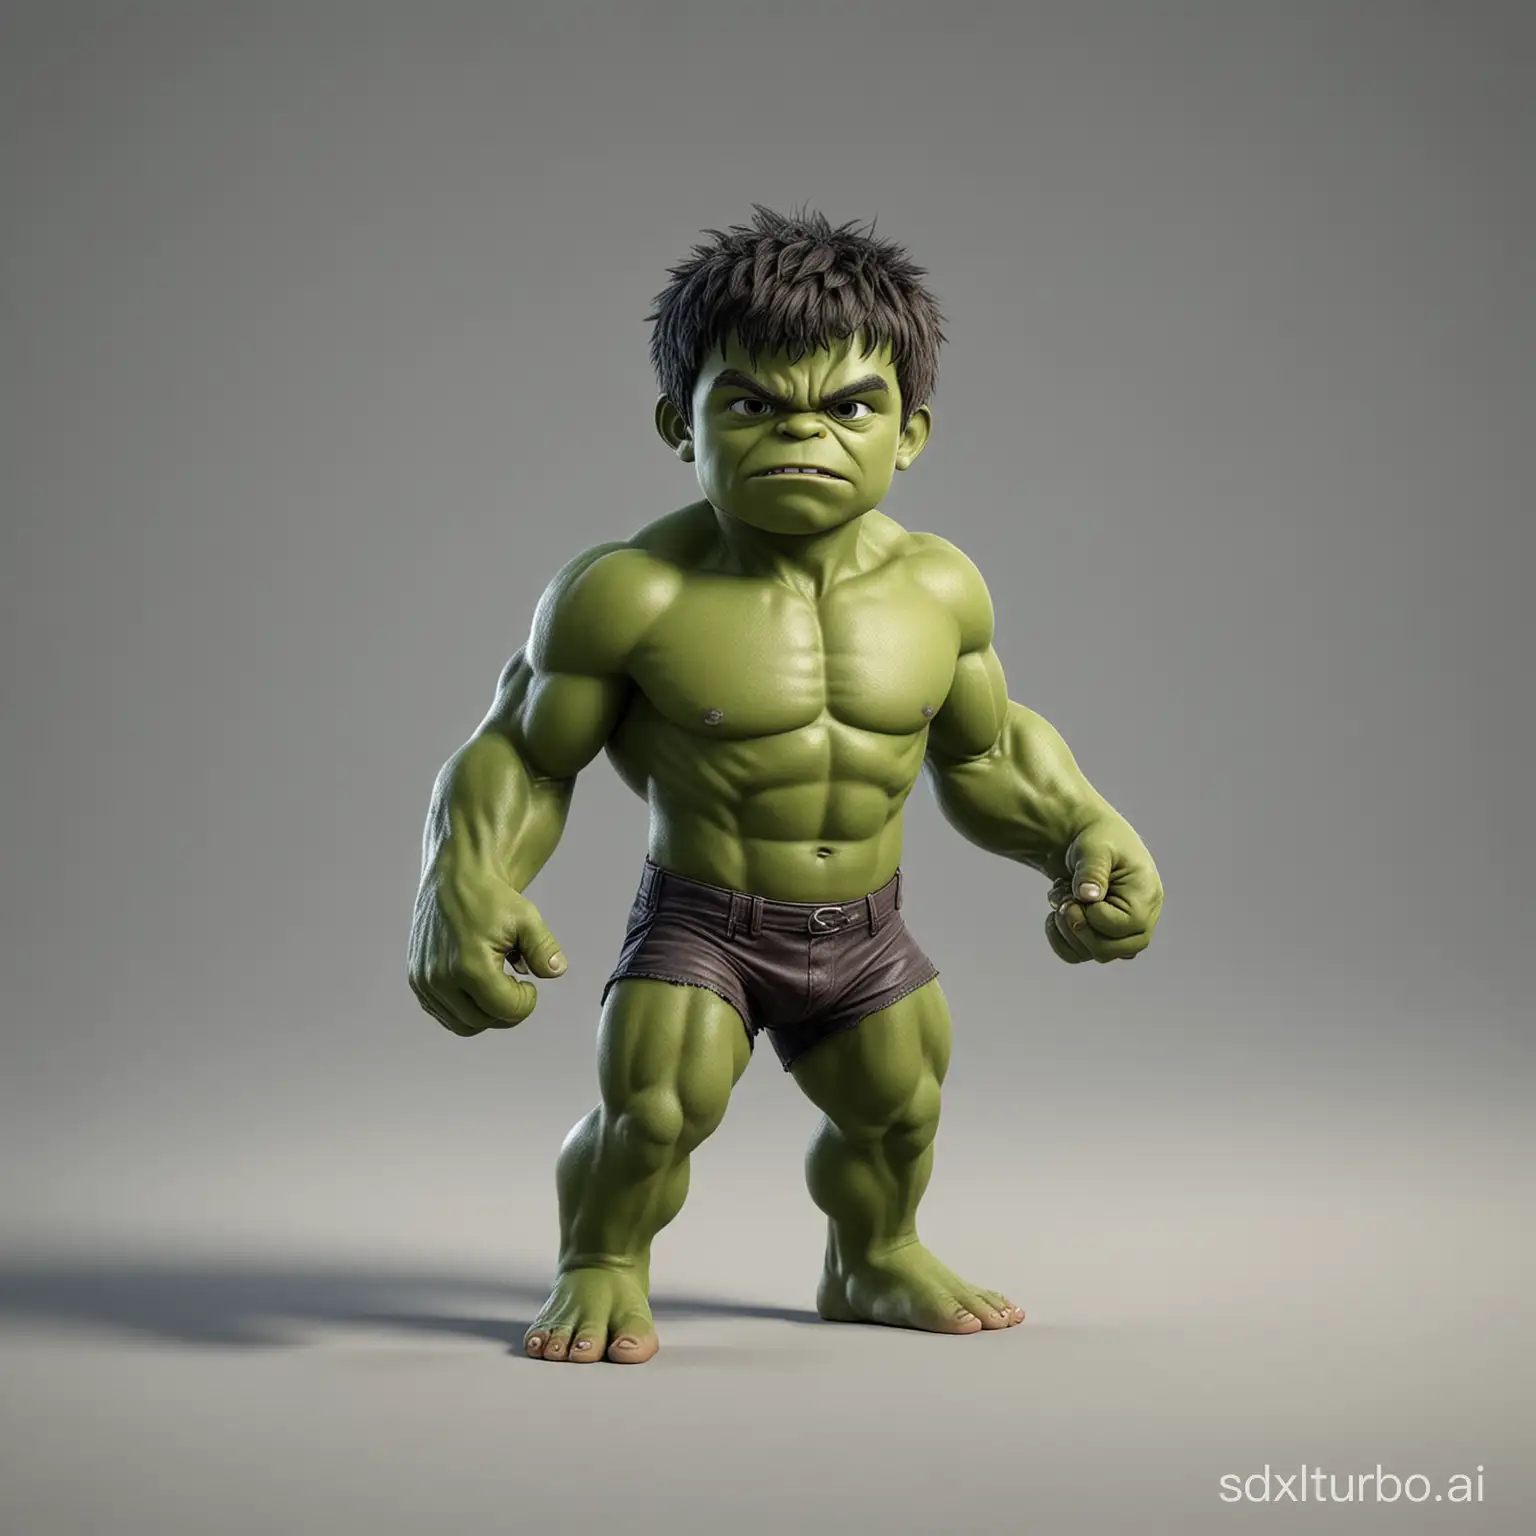 Little child Hulk, game character, stands at full height